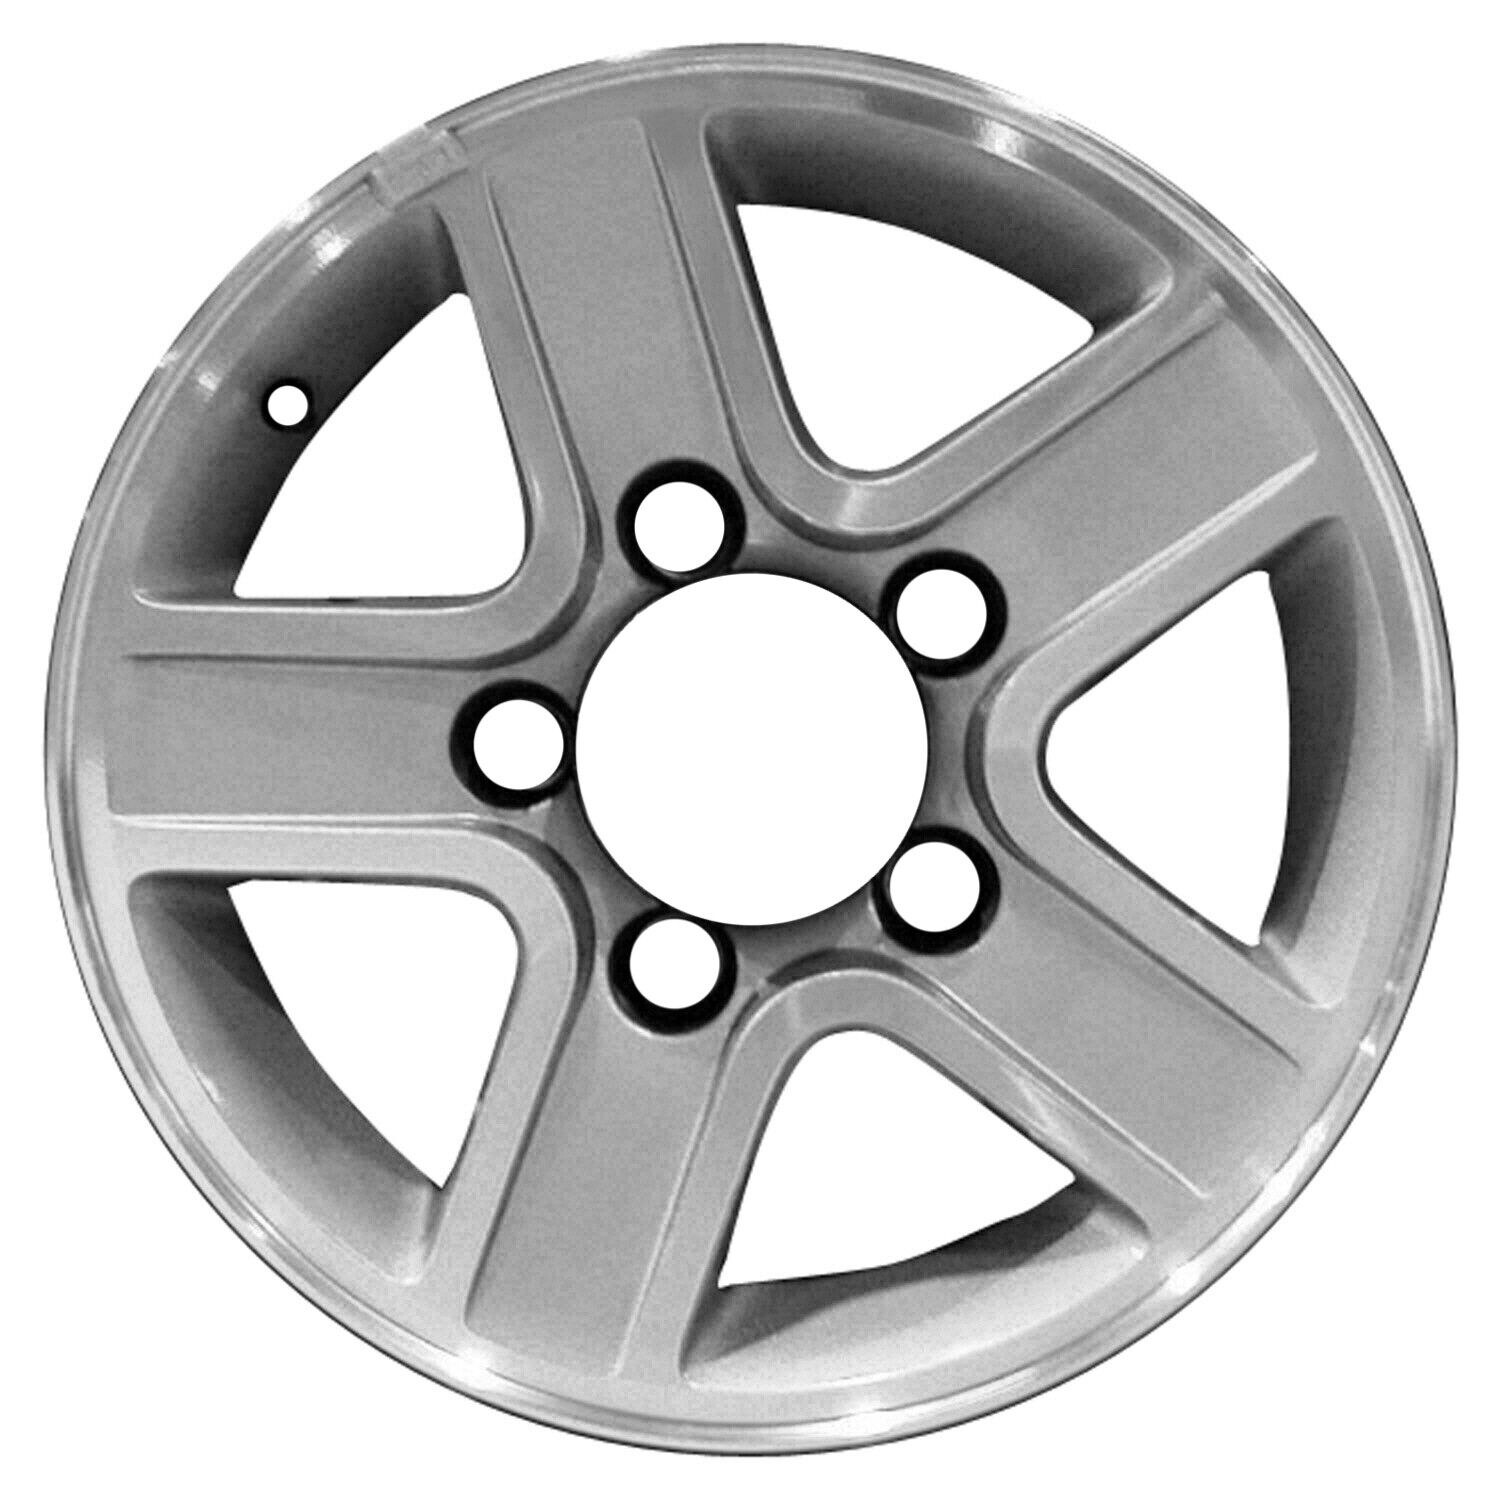 60182 Reconditioned OEM Aluminum Wheel 15x6 fits 2002-2004 Chevrolet Tracker